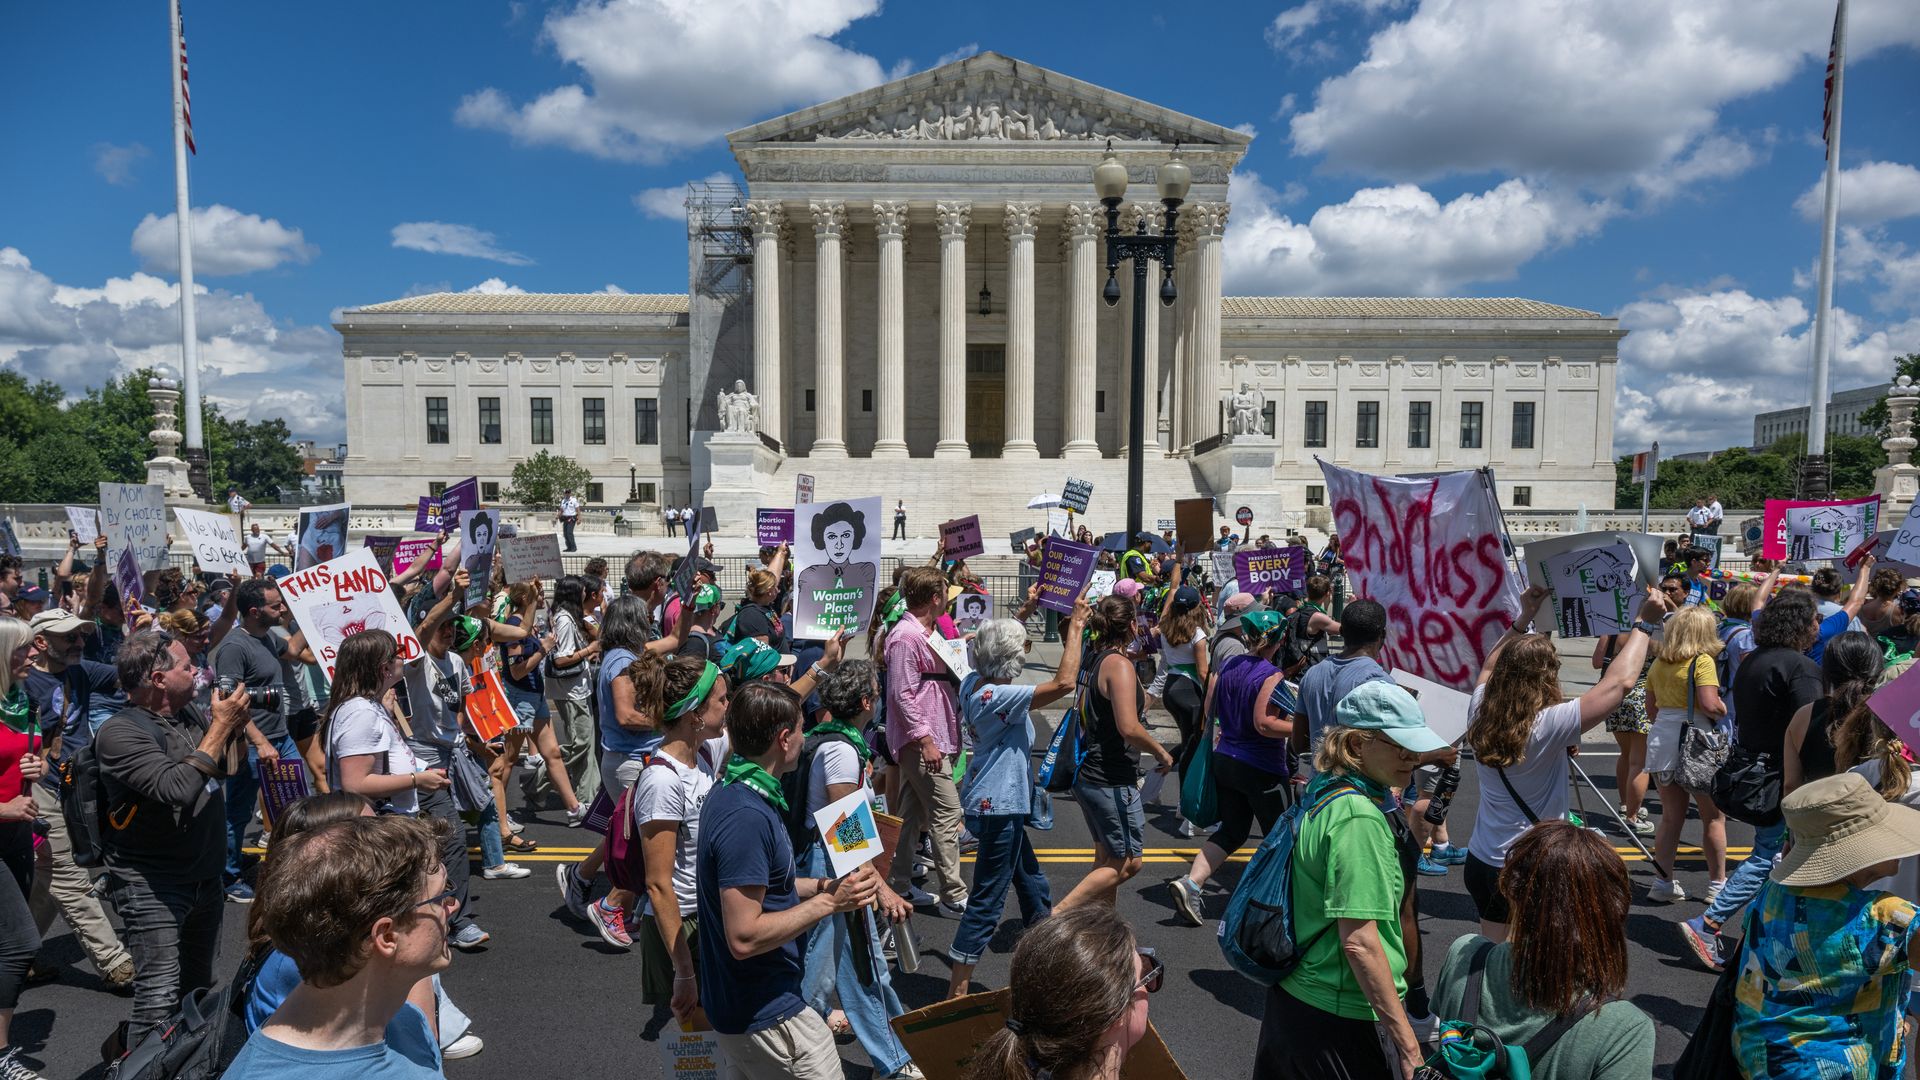 A photo of demonstrators outside the Supreme Court